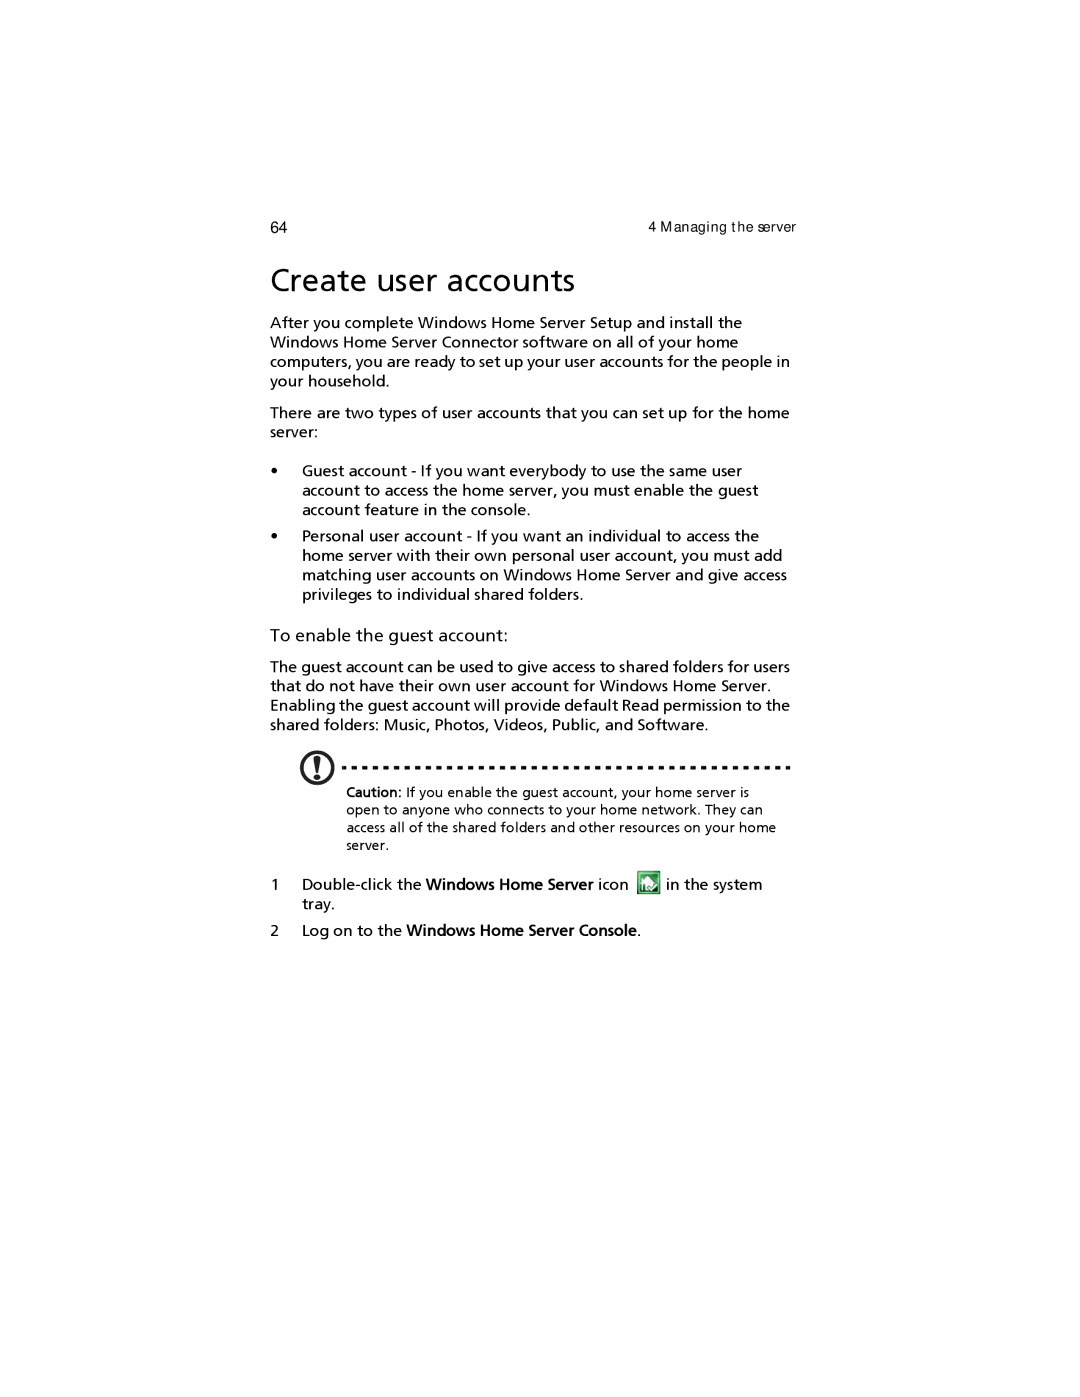 Acer easyStore H340 manual Create user accounts, To enable the guest account 